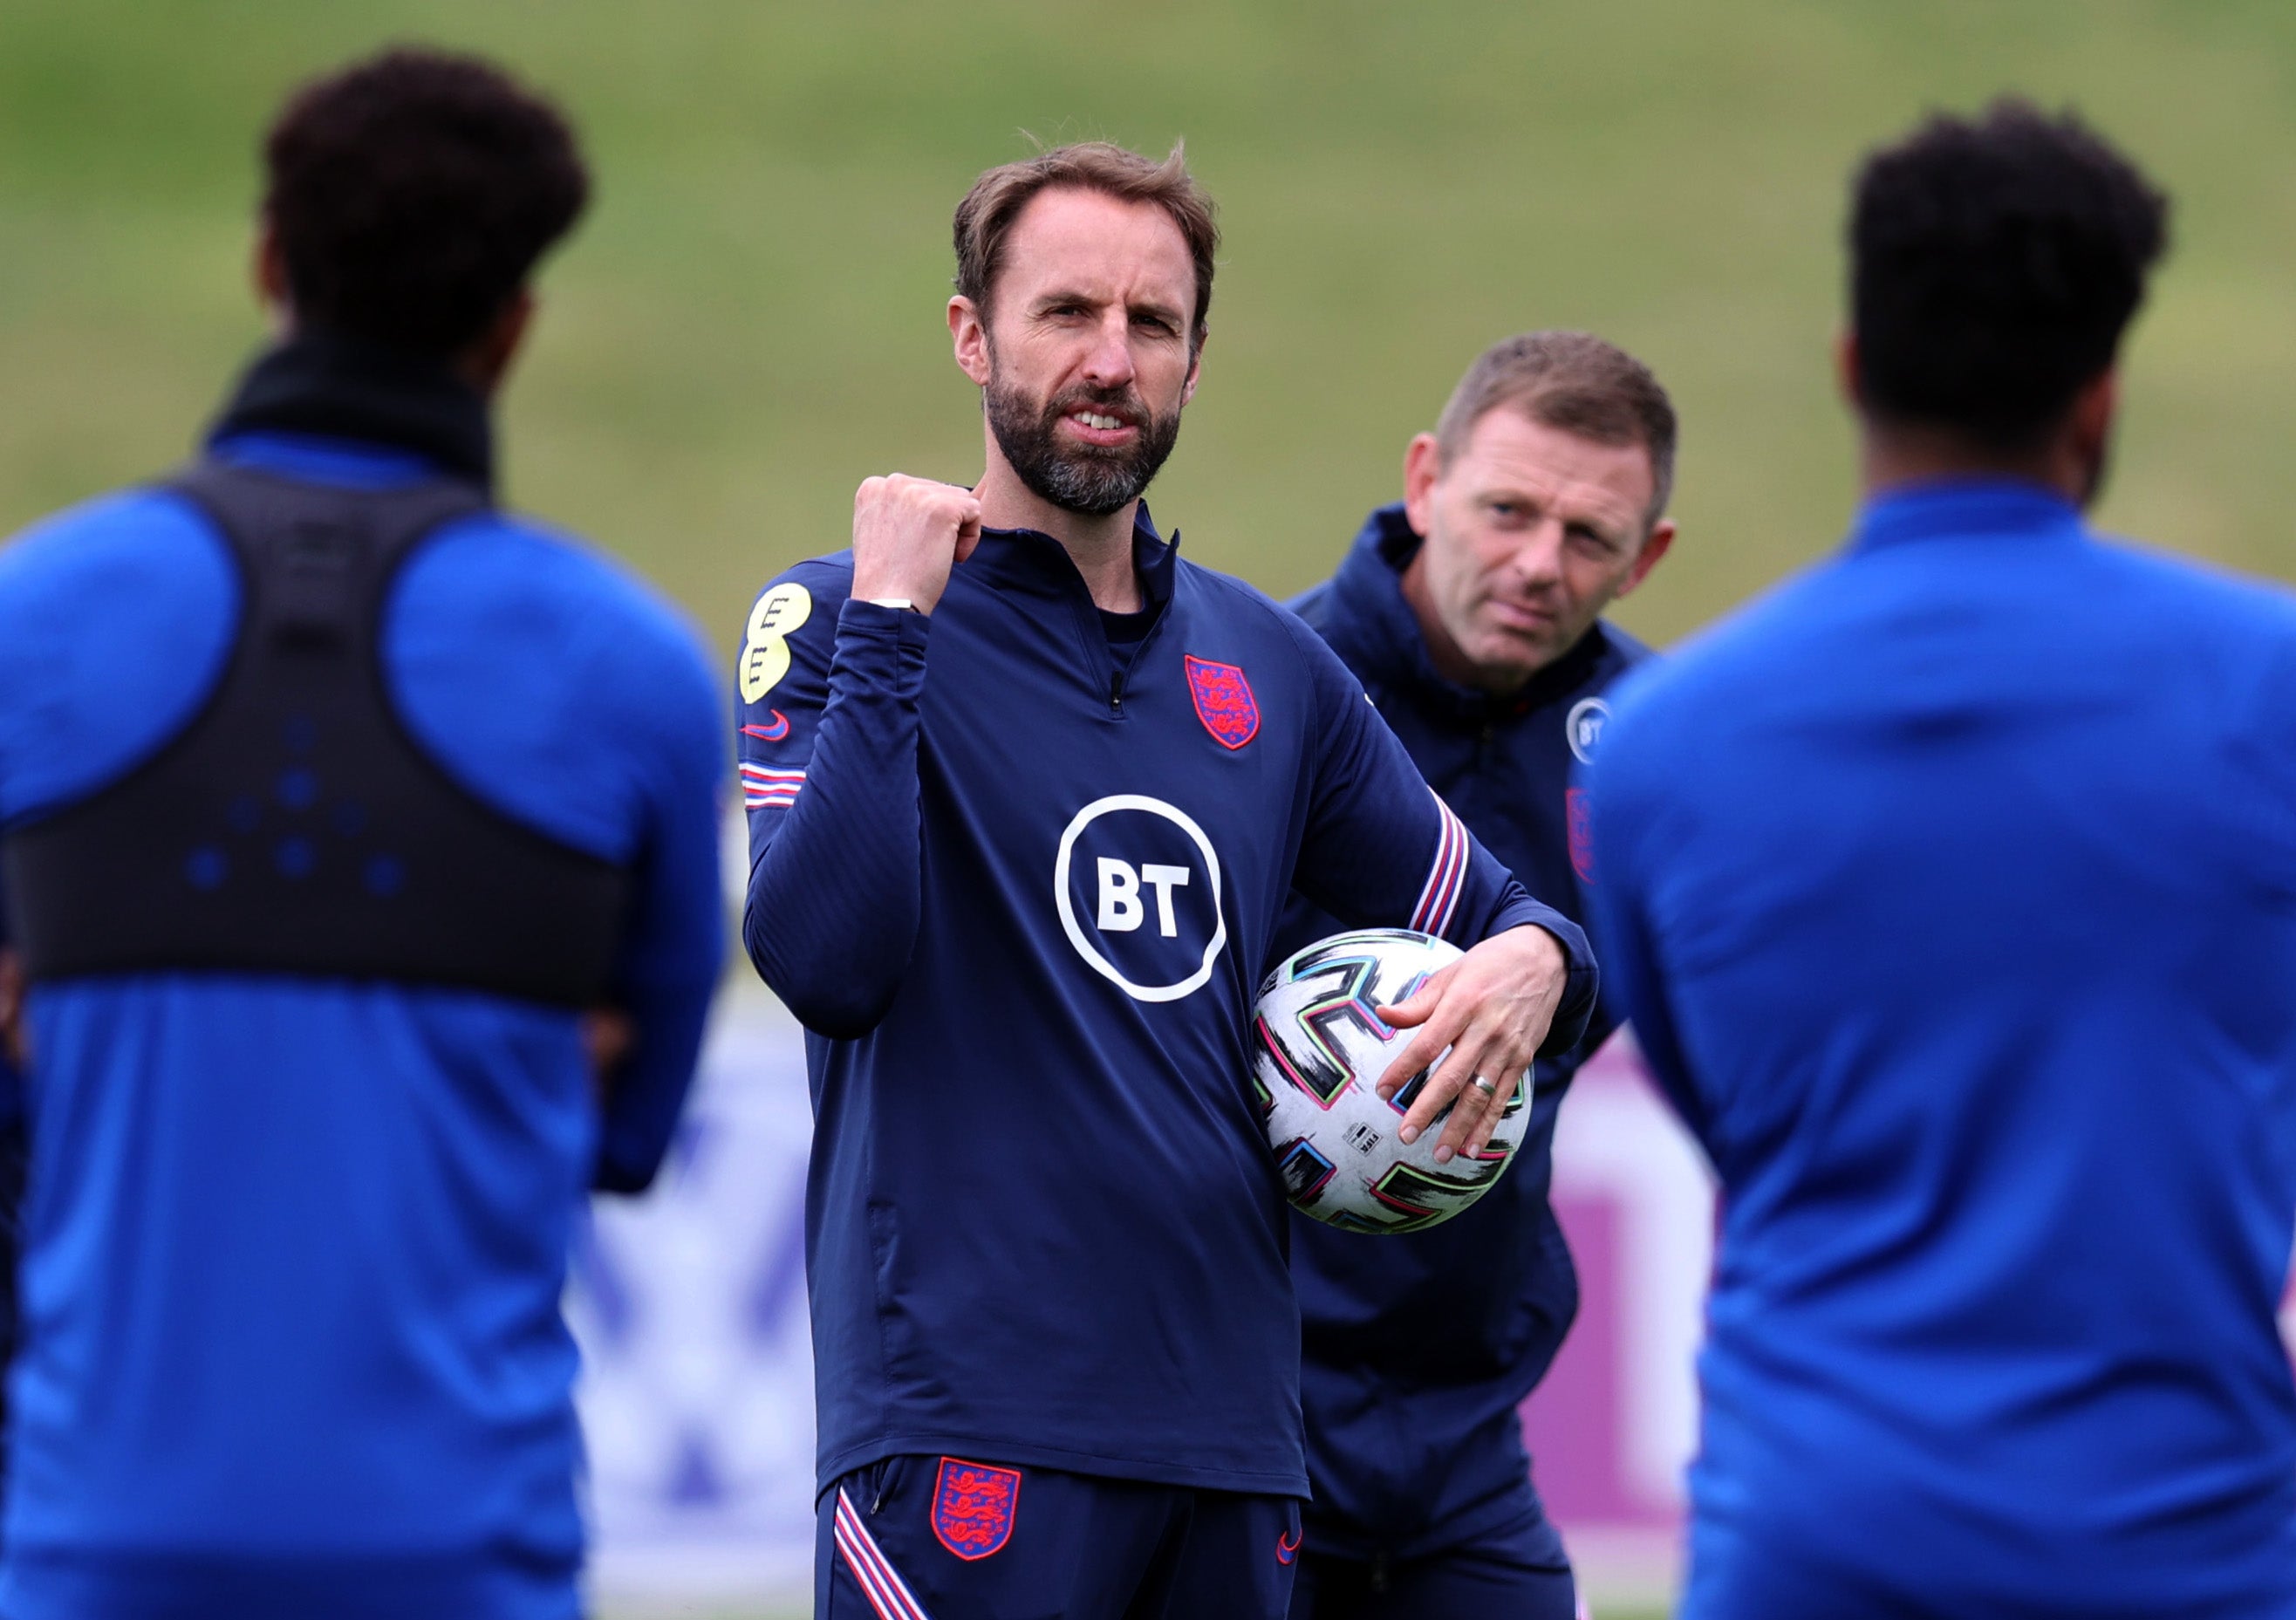 The wait is nearly over for England manager Gareth Southgate